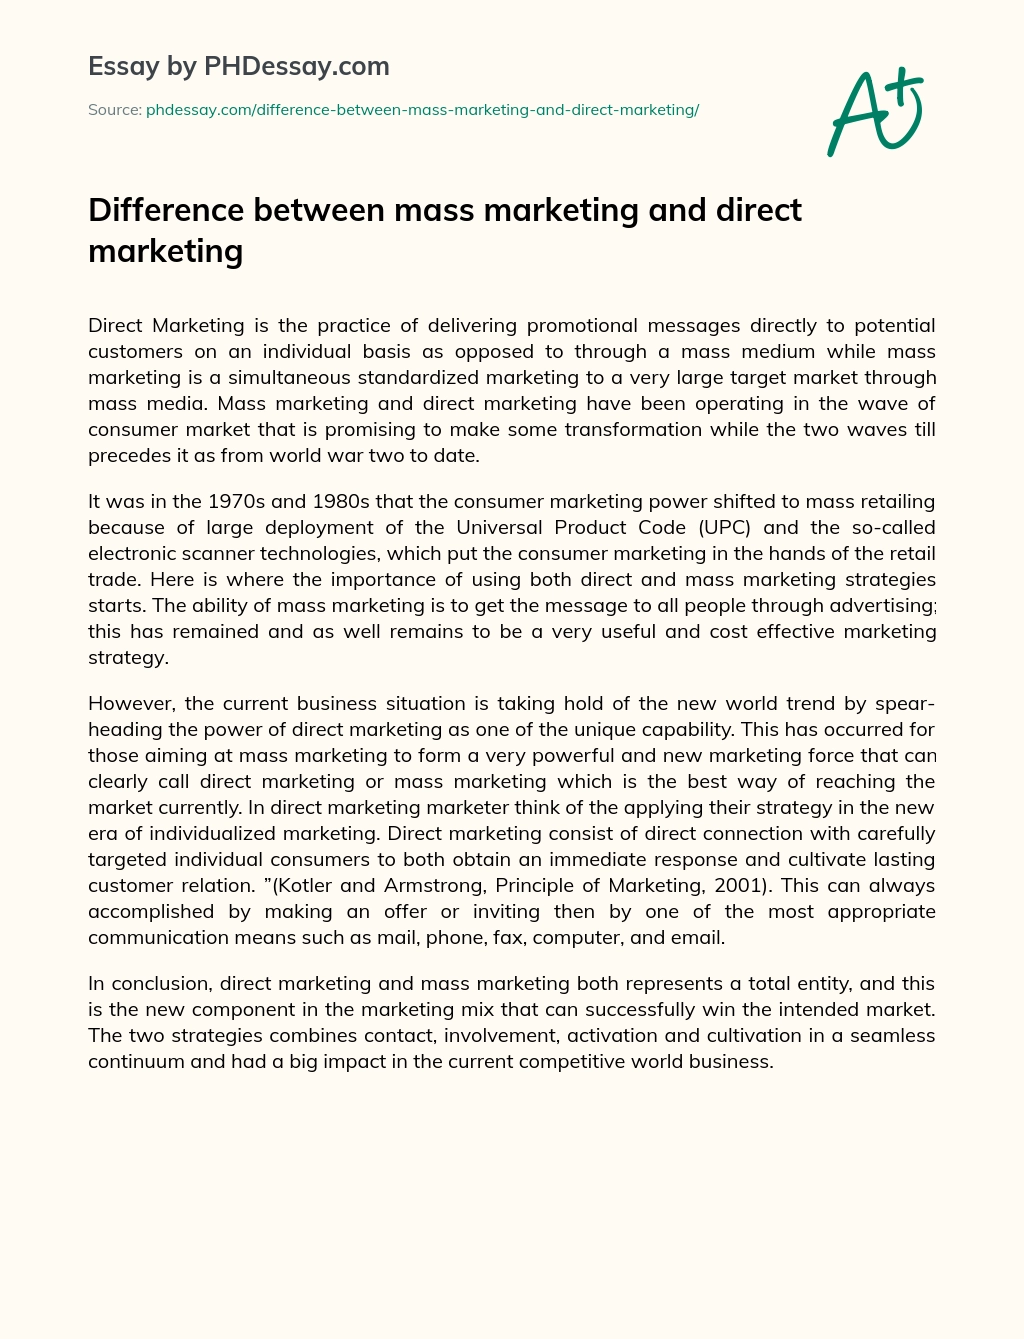 Difference between mass marketing and direct marketing essay